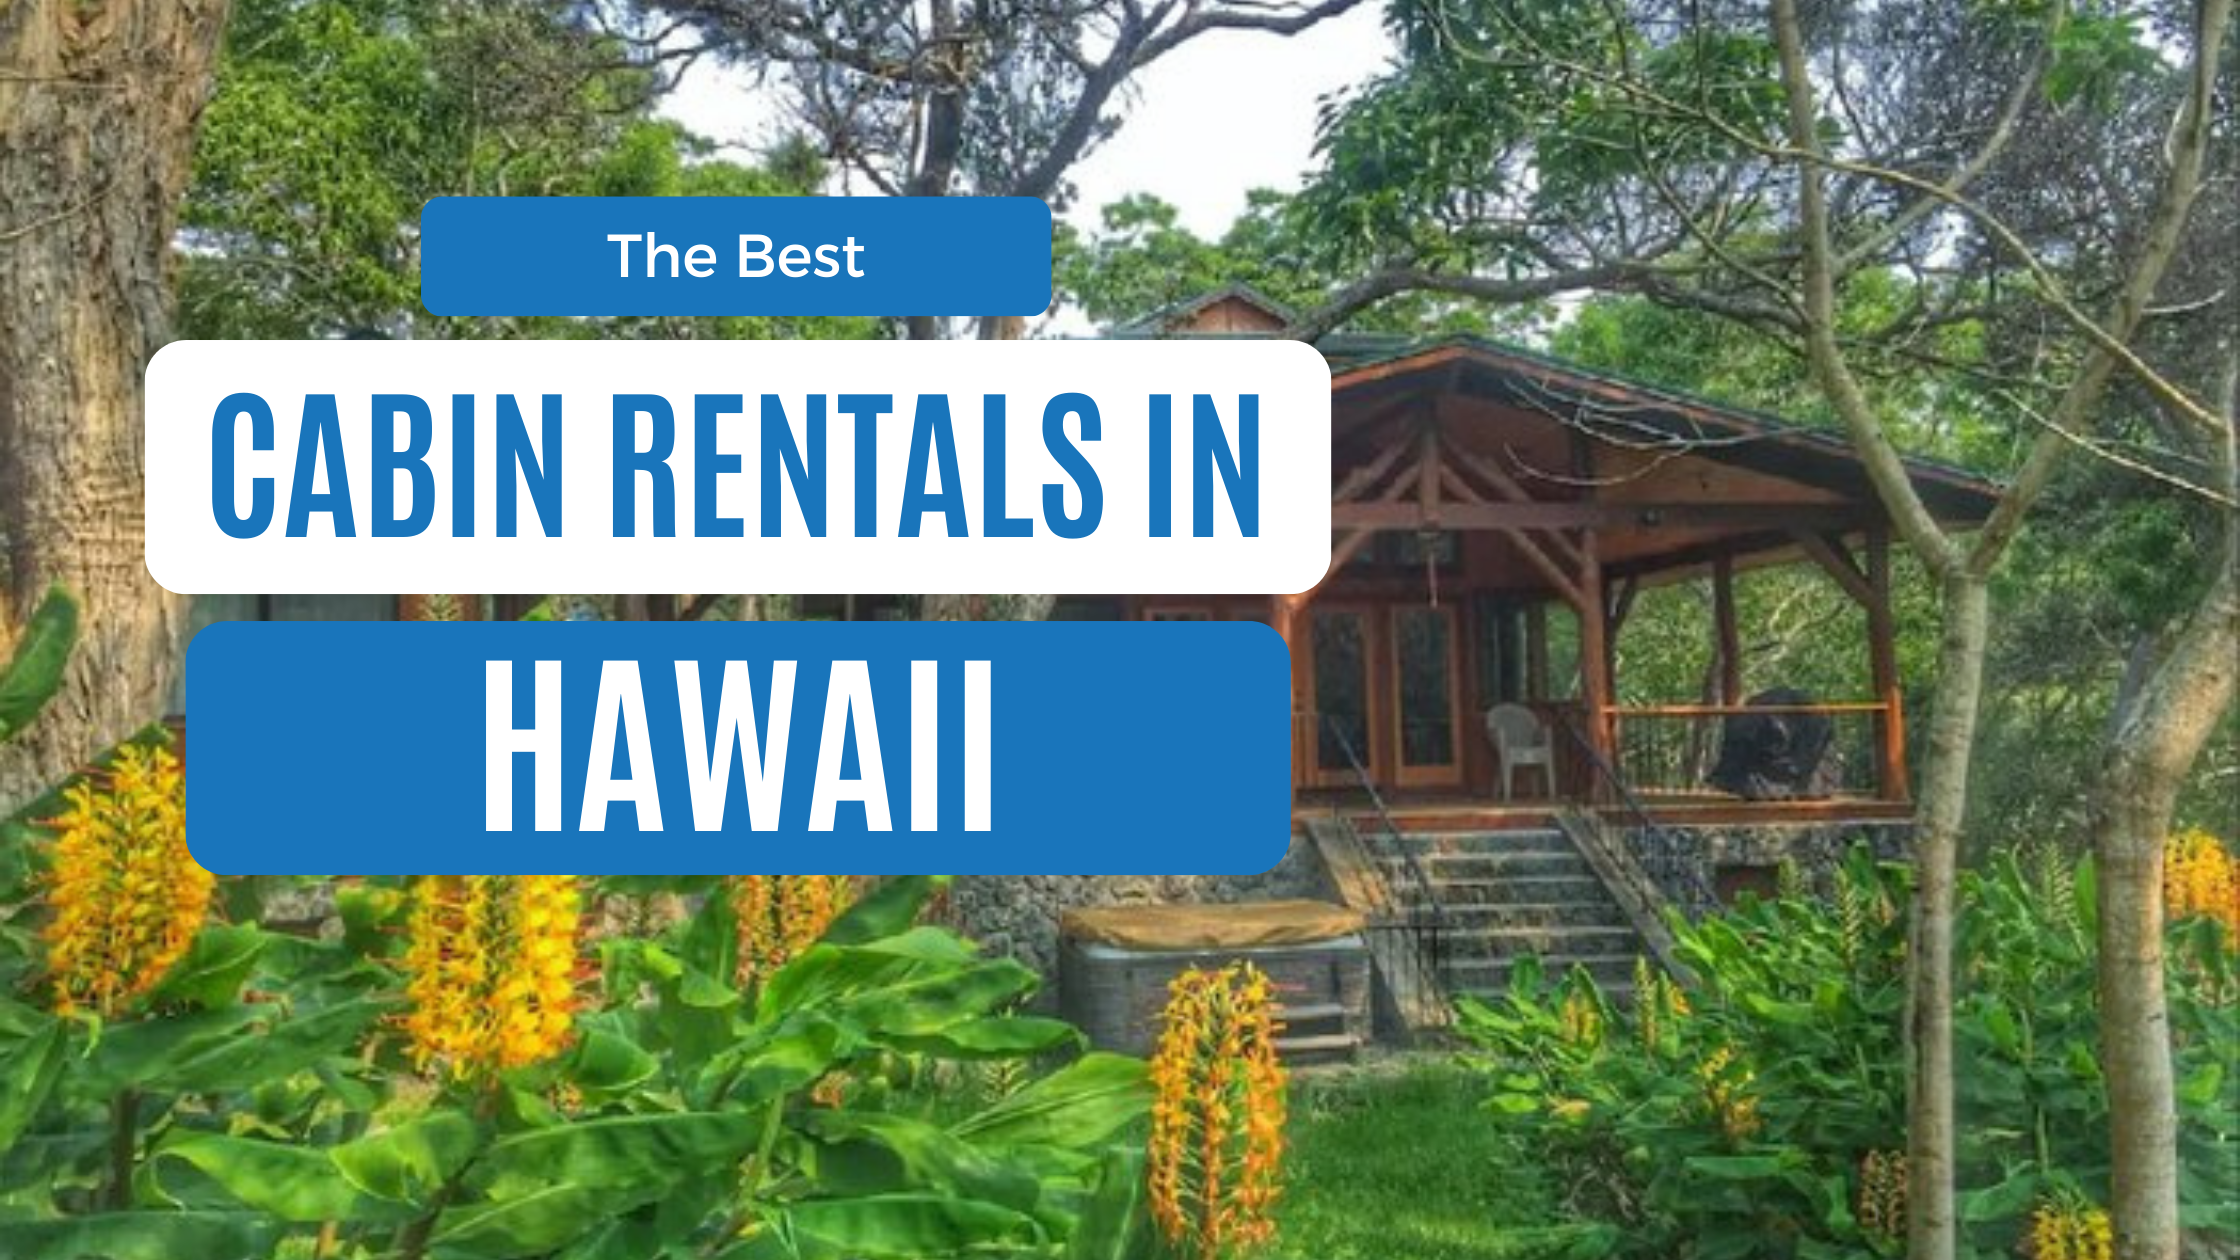 You Won’t Forget Your Stay In One Of These One-Of-A-Kind Best Cabins In Hawaii